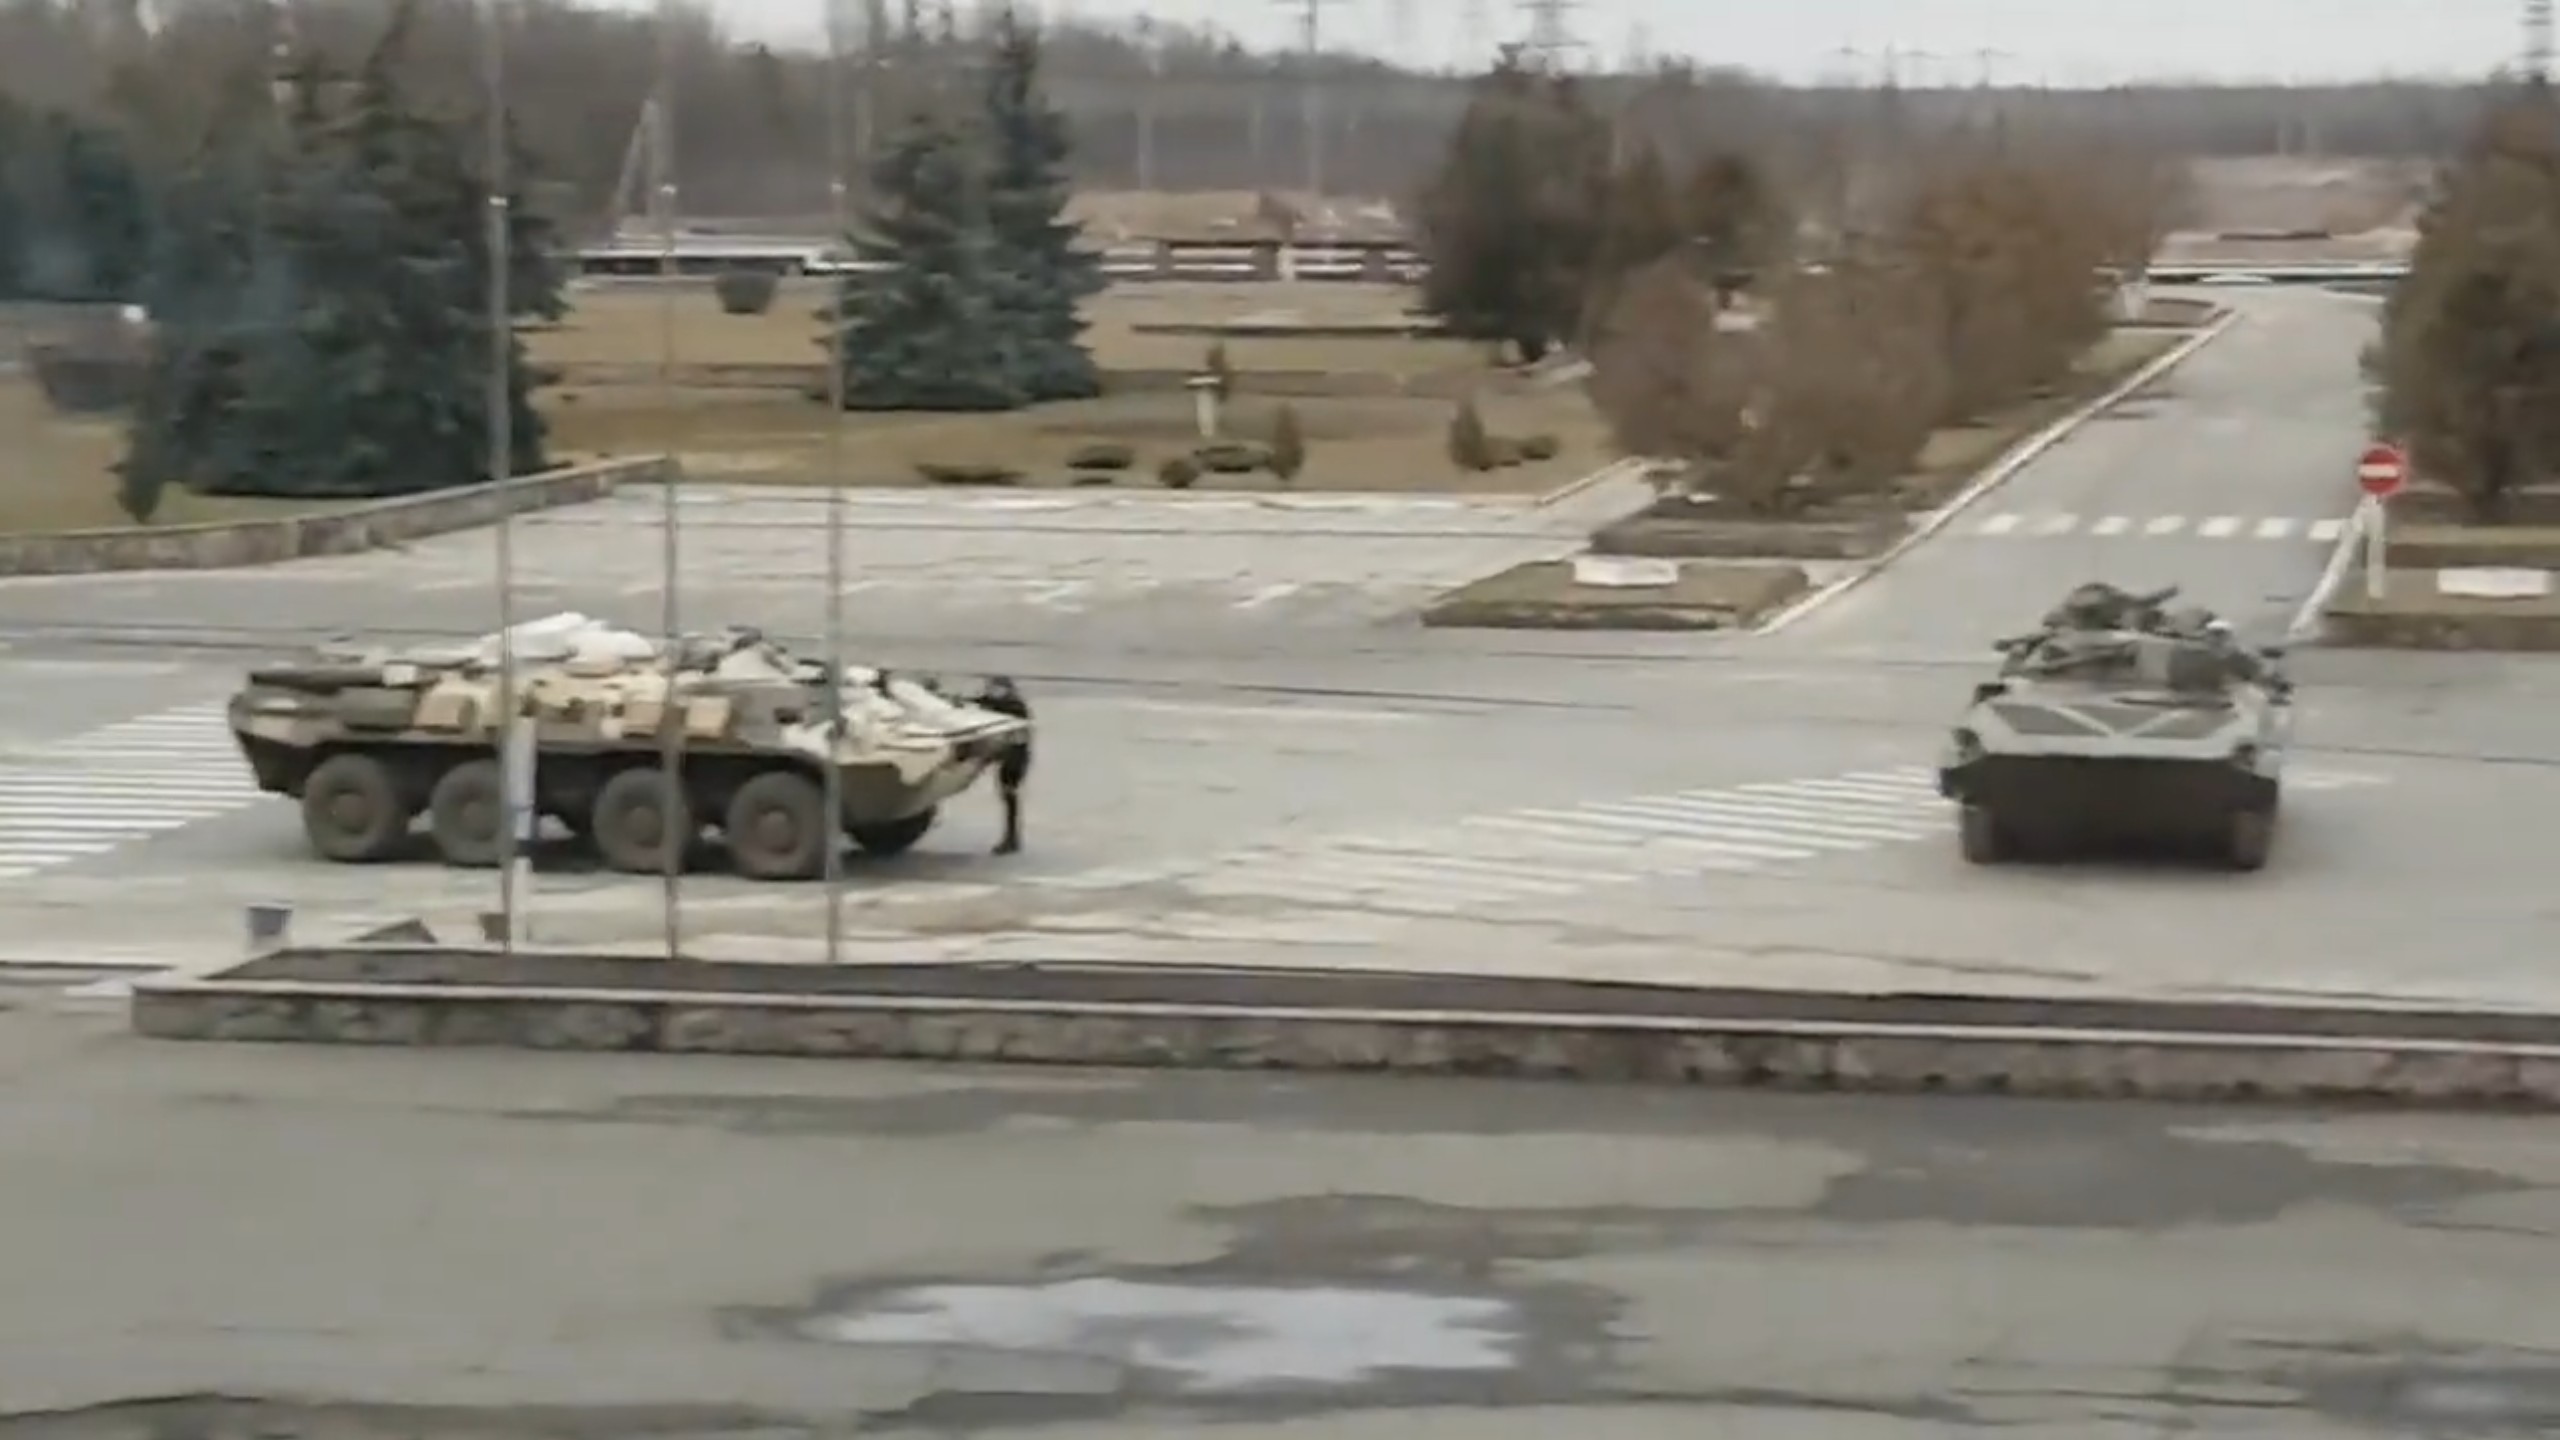 Russian armored vehicles in Chernobyl